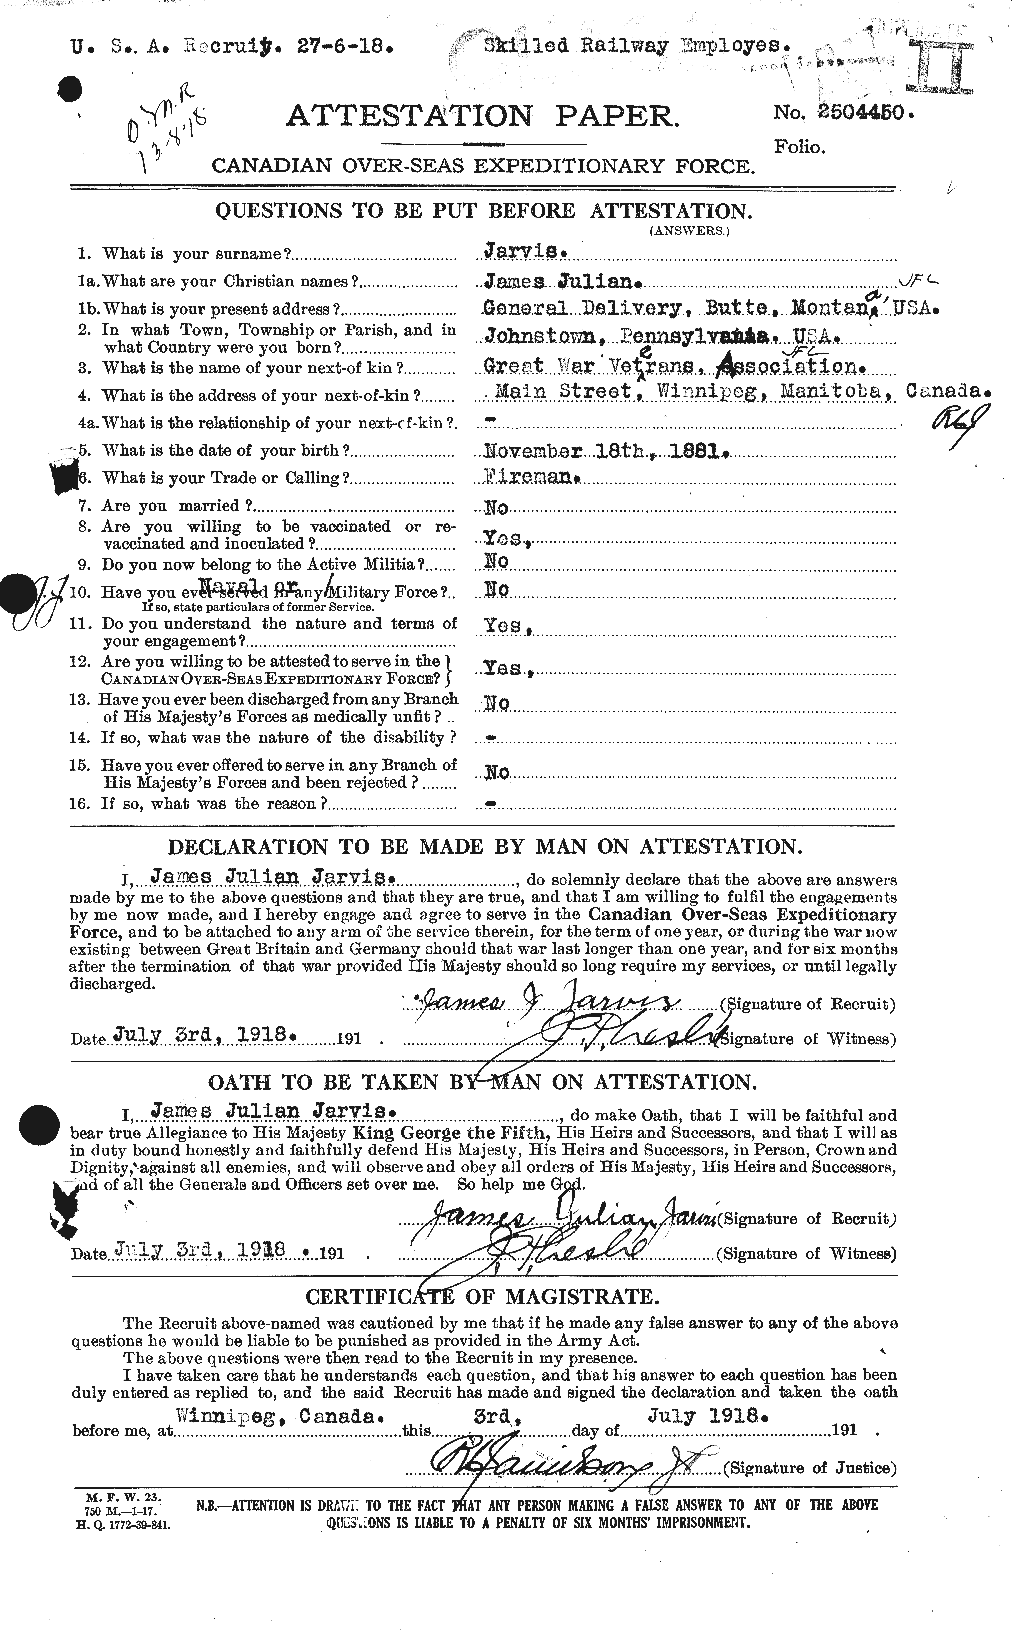 Personnel Records of the First World War - CEF 414749a